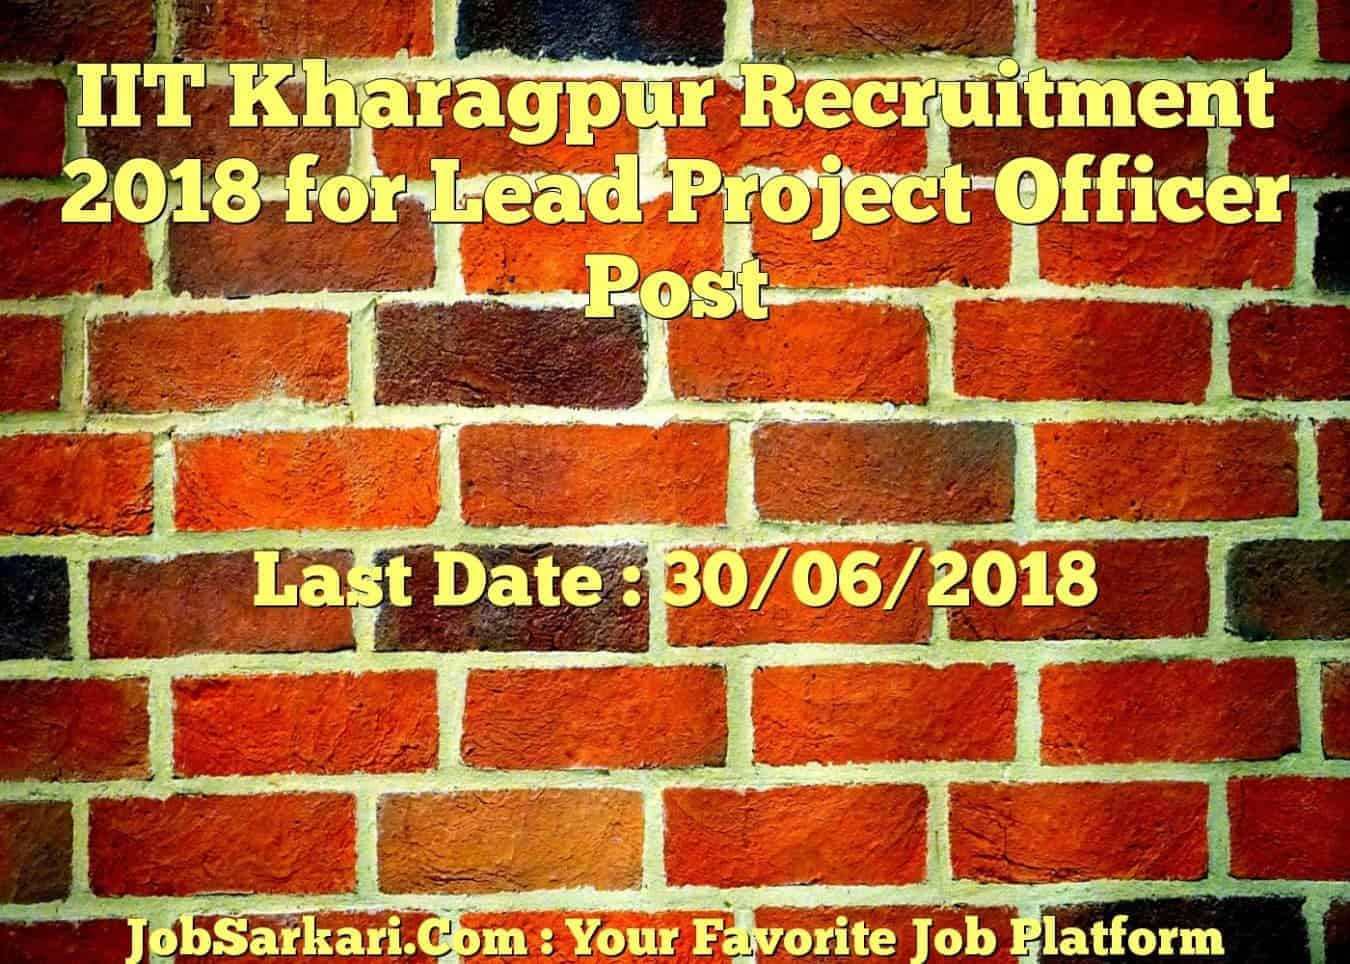 IIT Kharagpur Recruitment 2018 for Lead Project Officer Post